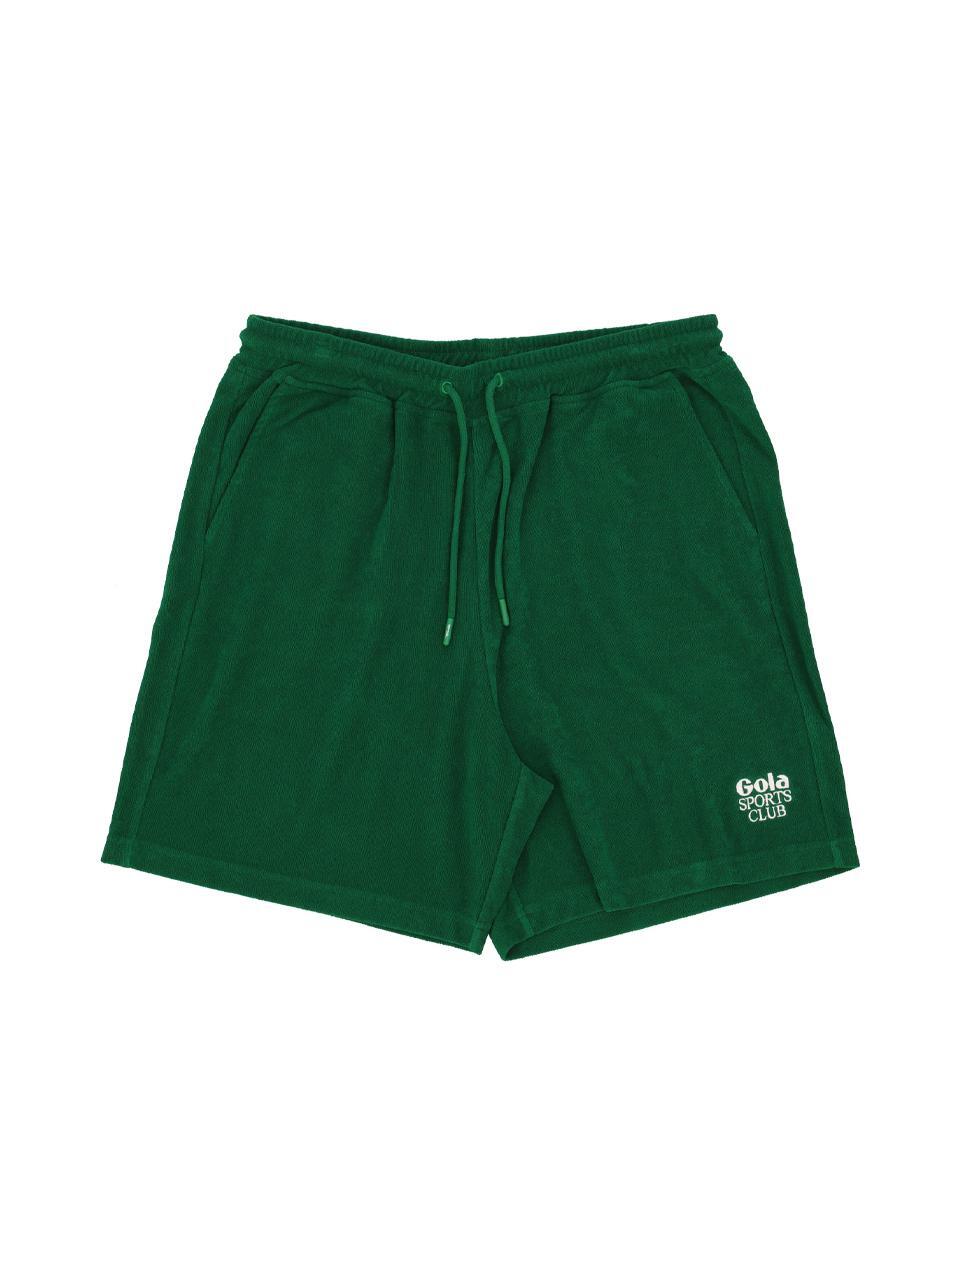 TERRY SHORTS [GREEN]